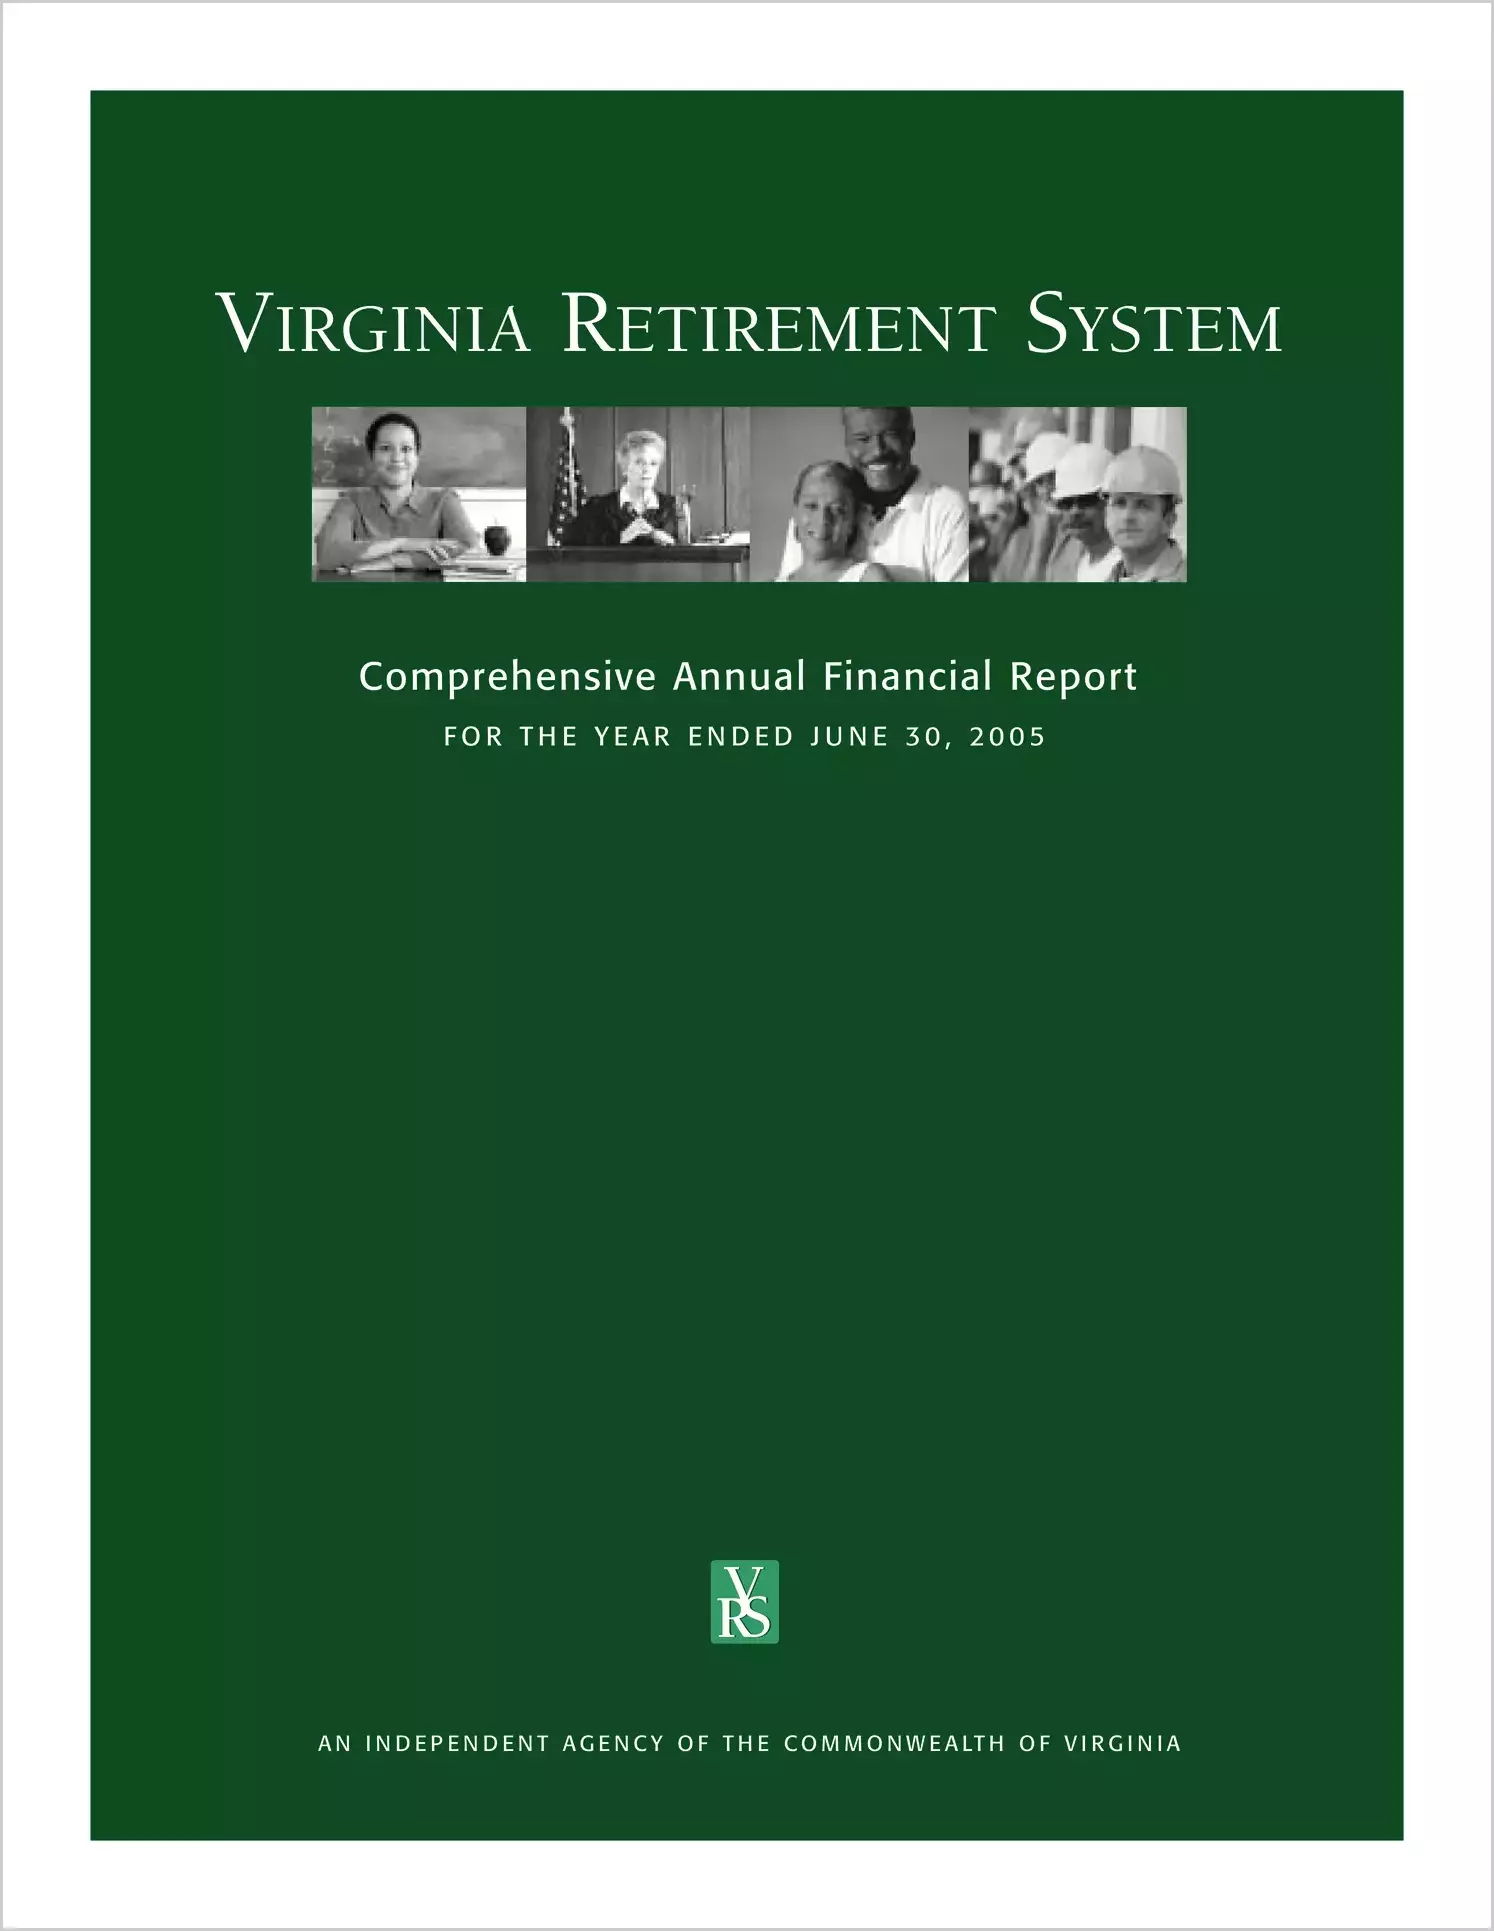 Virginia Retirement System Comprehensive Annual Financial Report for the year ended June 30, 2005